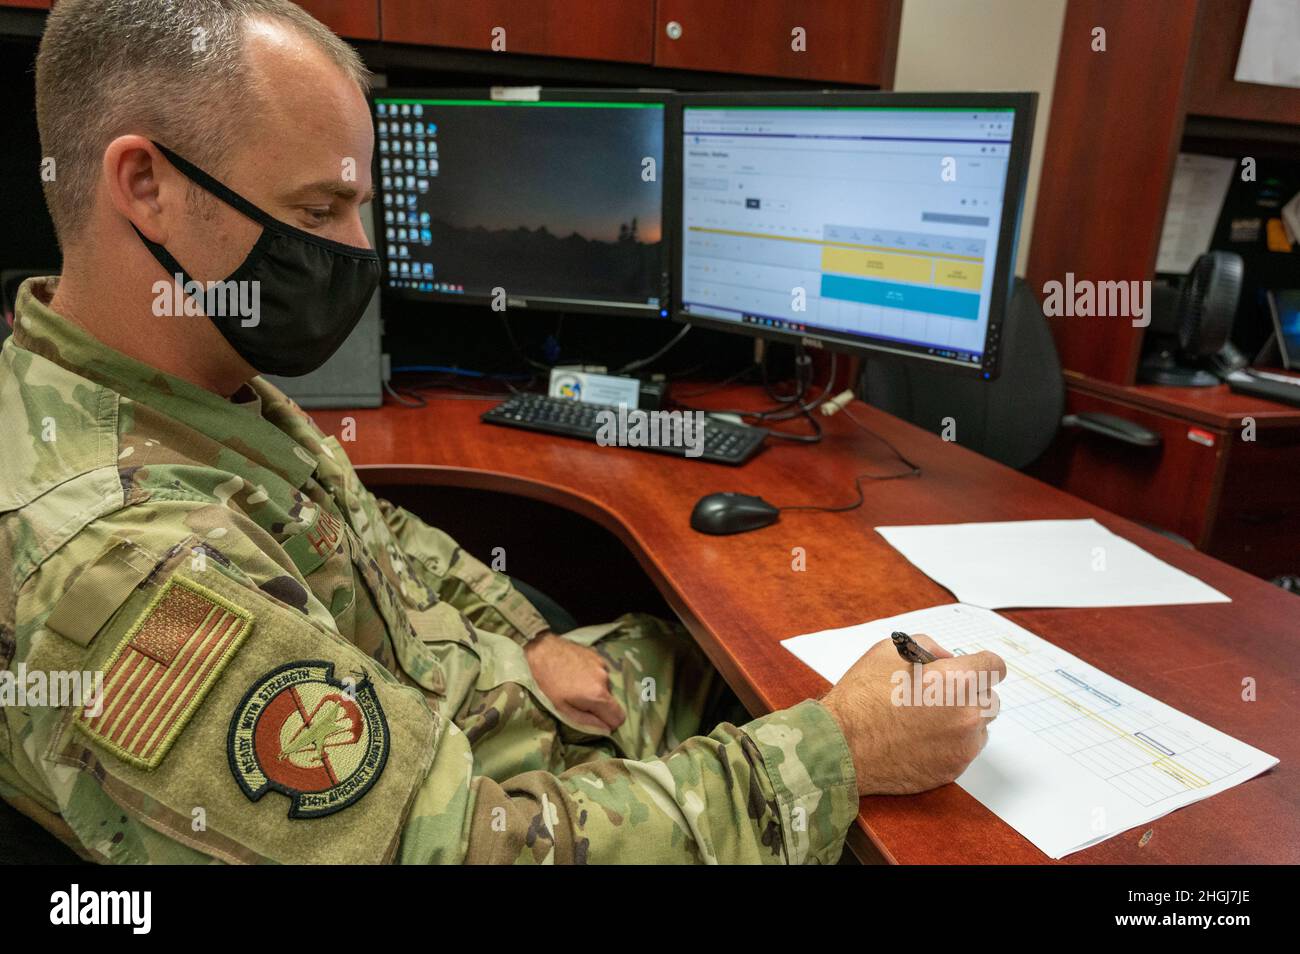 Master Sgt. Nathan Horrocks, 314th Aircraft Maintenance Squadron section chief, navigates the Torque personnel management system and goes through a printed schedule at Little Rock Air Force Base, Arkansas, Aug. 13, 2021. The Torque system allows section chiefs to oversee appointments, manning, and qualifications of all maintainers within one system. Stock Photo